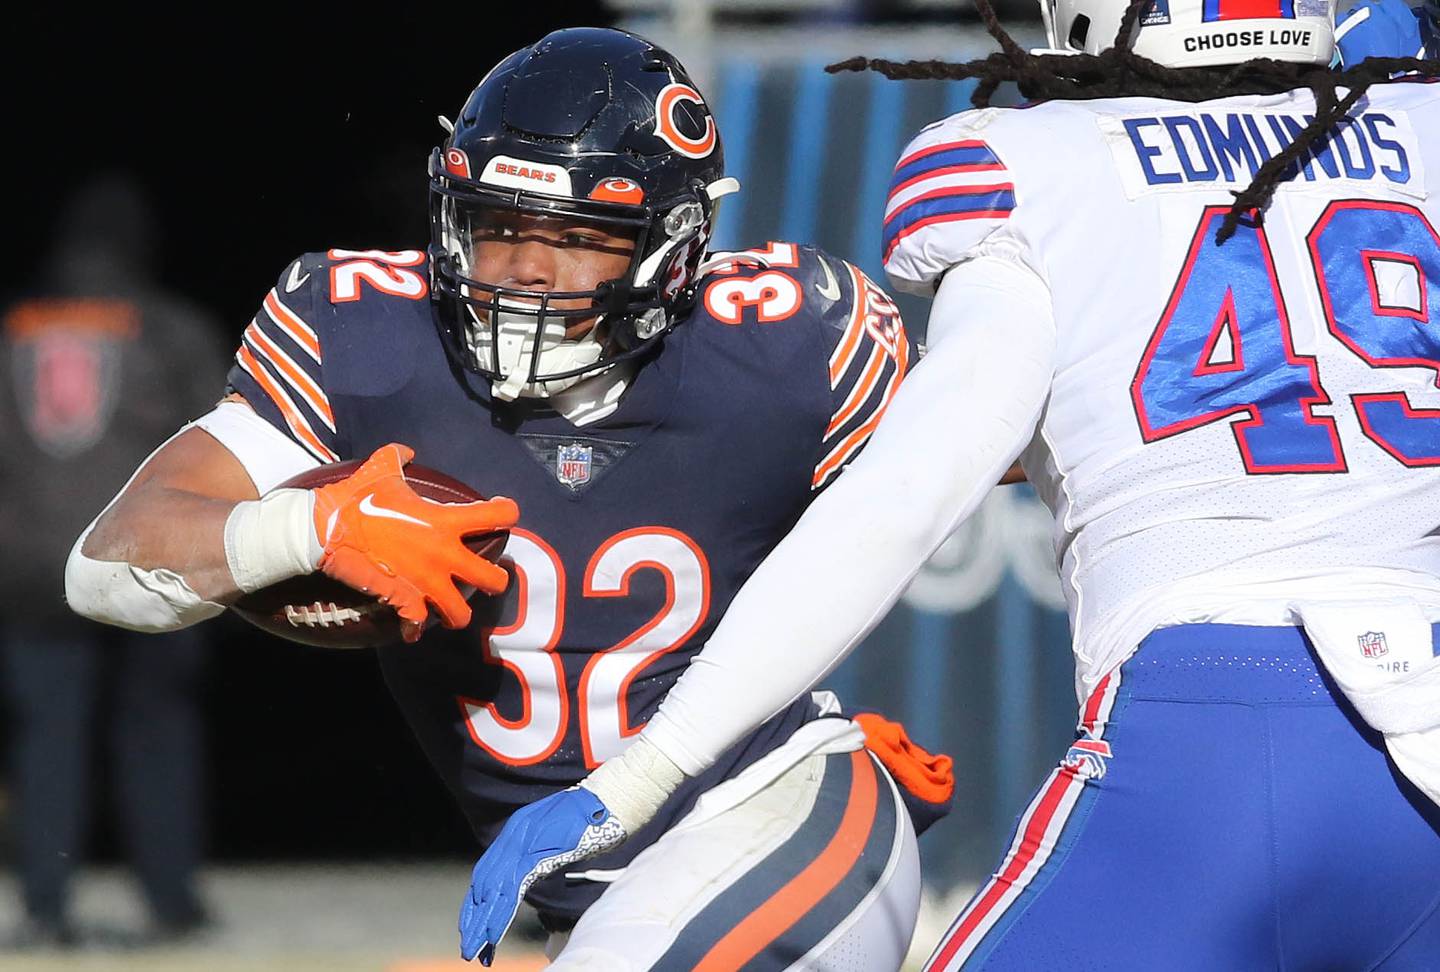 Chicago Bears running back David Montgomery looks to get by Buffalo Bills linebacker Tremaine Edmunds during their game Sunday, Dec. 24, 2022, at Soldier Field in Chicago.